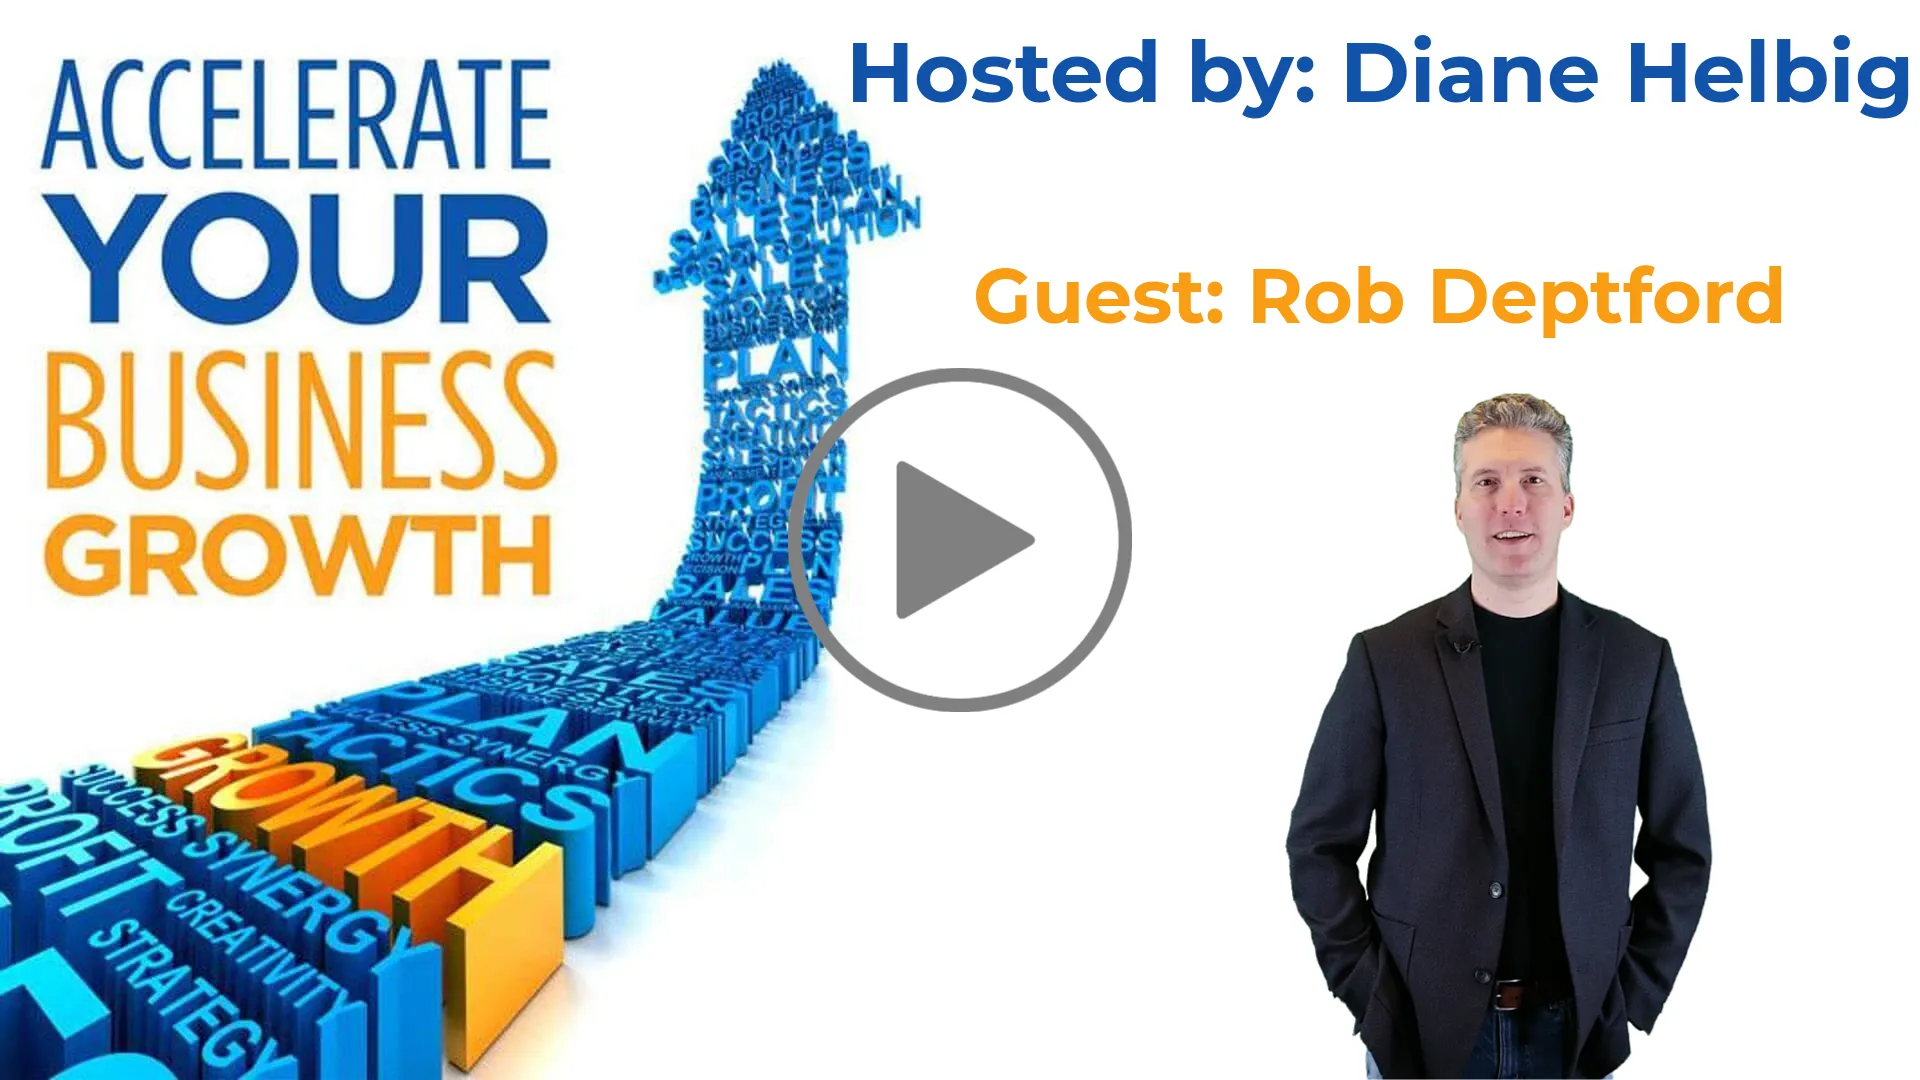 Accelerate Your Business Growth podcast promo image with guest Rob Deptford